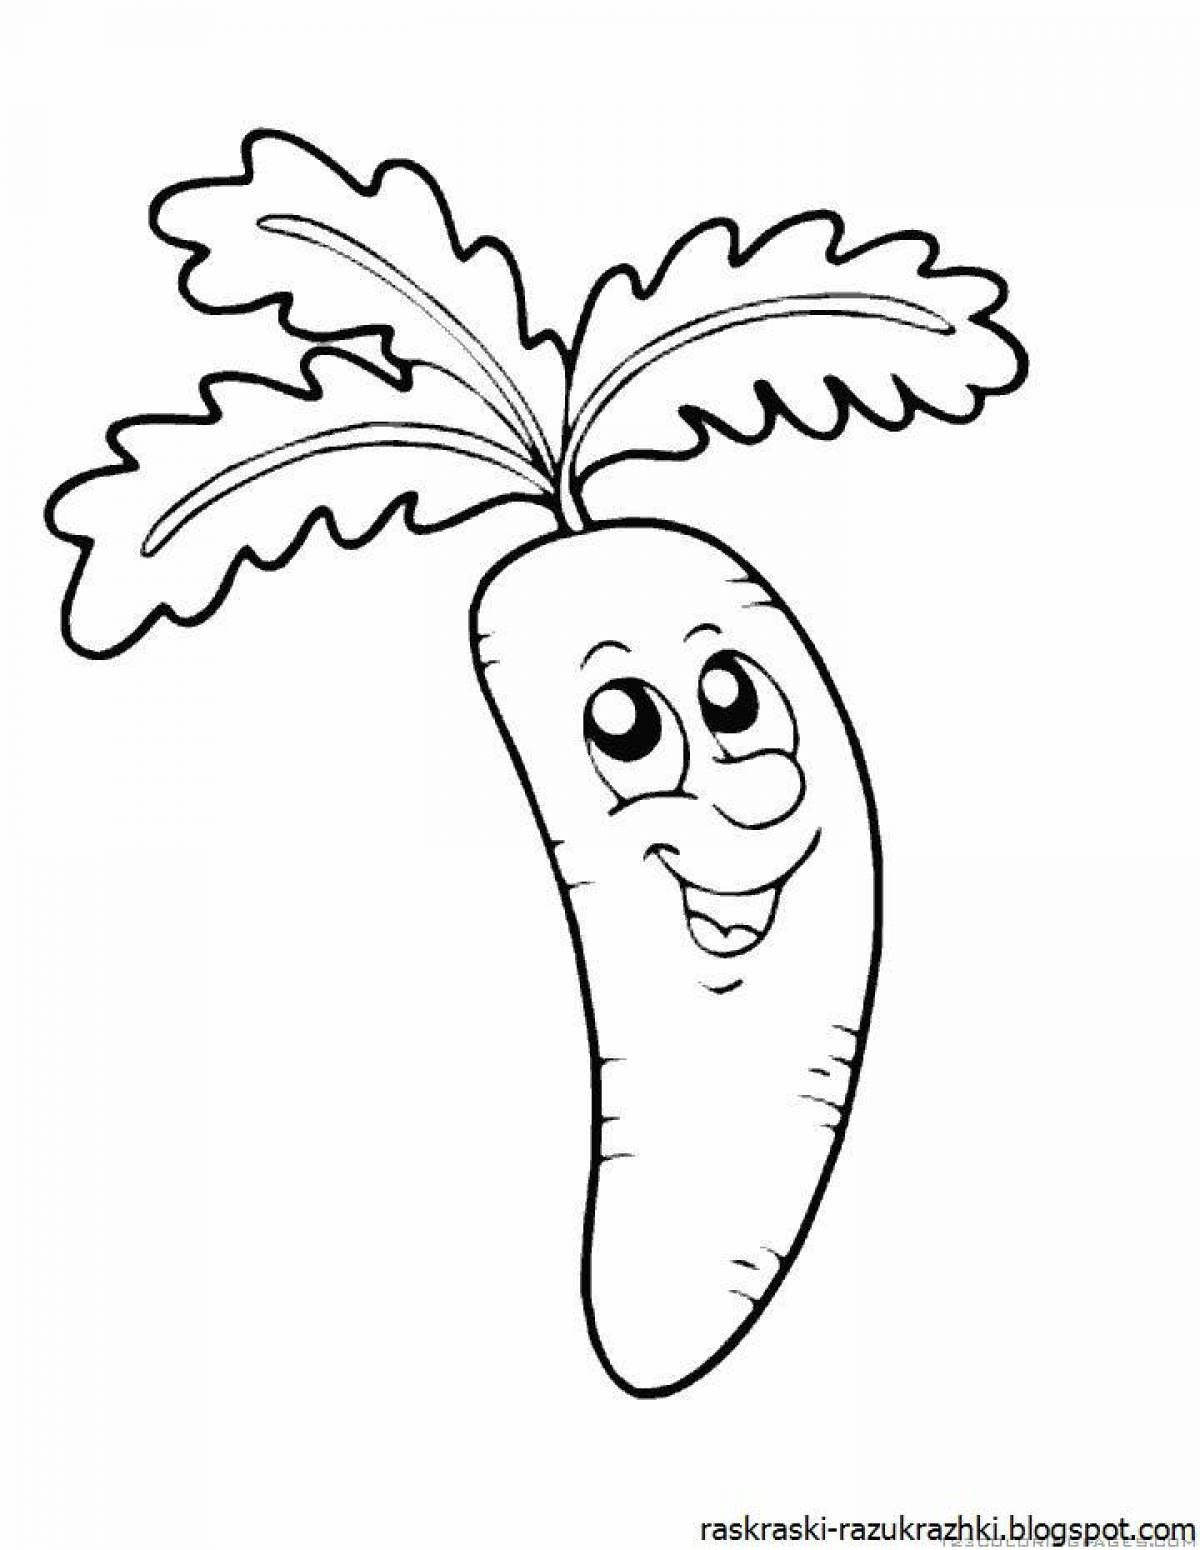 Carrot coloring pages with crazy colors for kids